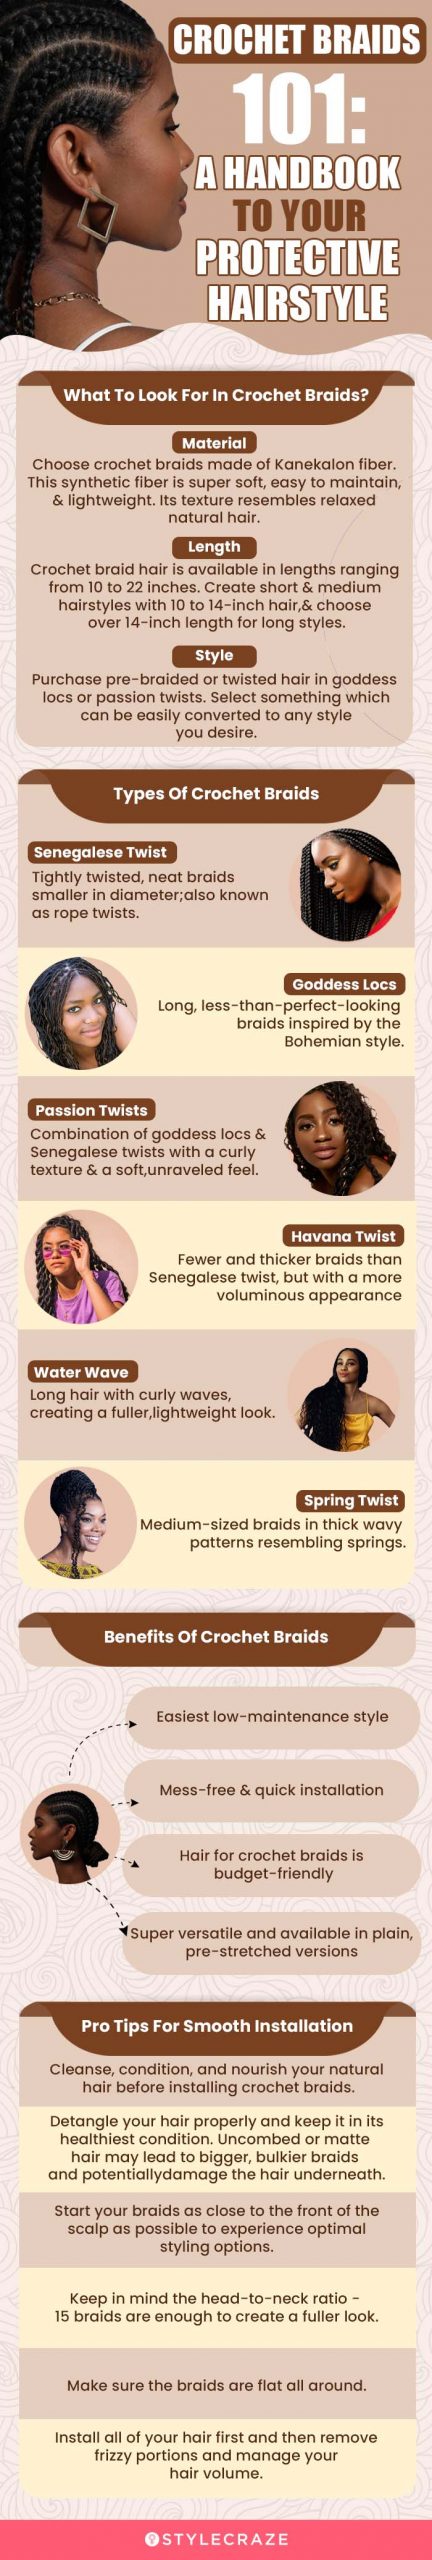 Crochet Braids 101: A Handbook To Your Protective Hairstyle [infographic]